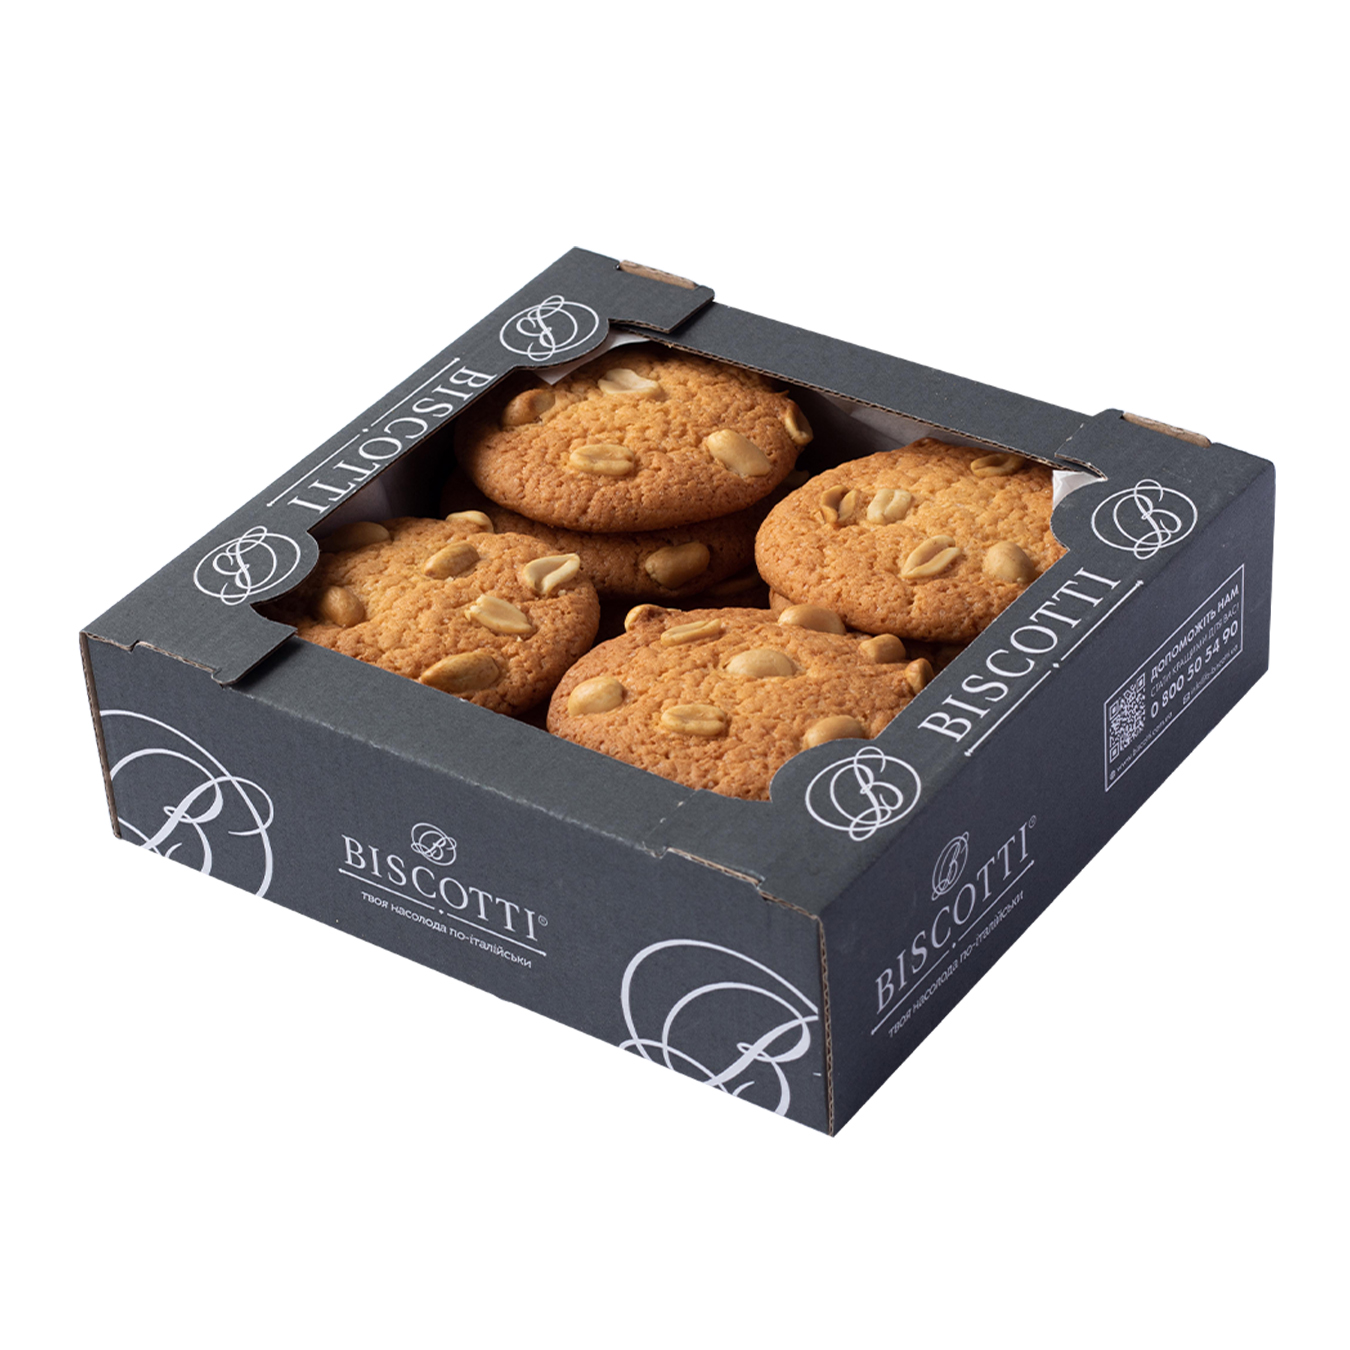 Biscotti American cookies with peanuts 400g 2